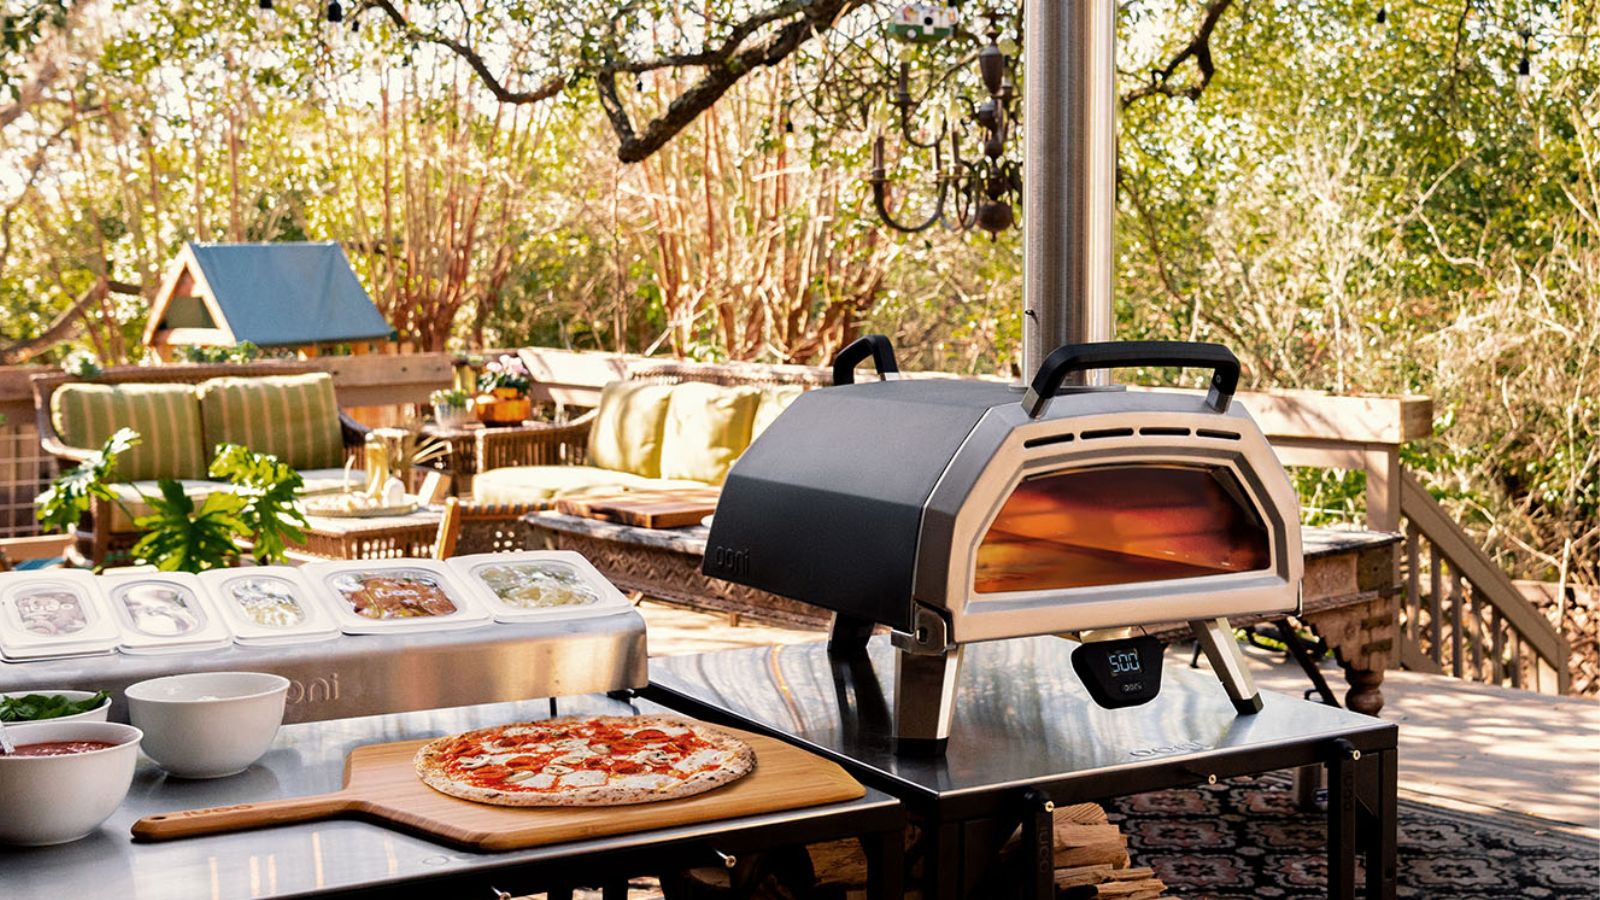 The Ninja Woodfire Outdoor Oven Cooks Pizza, Smokes Meat, and Much More